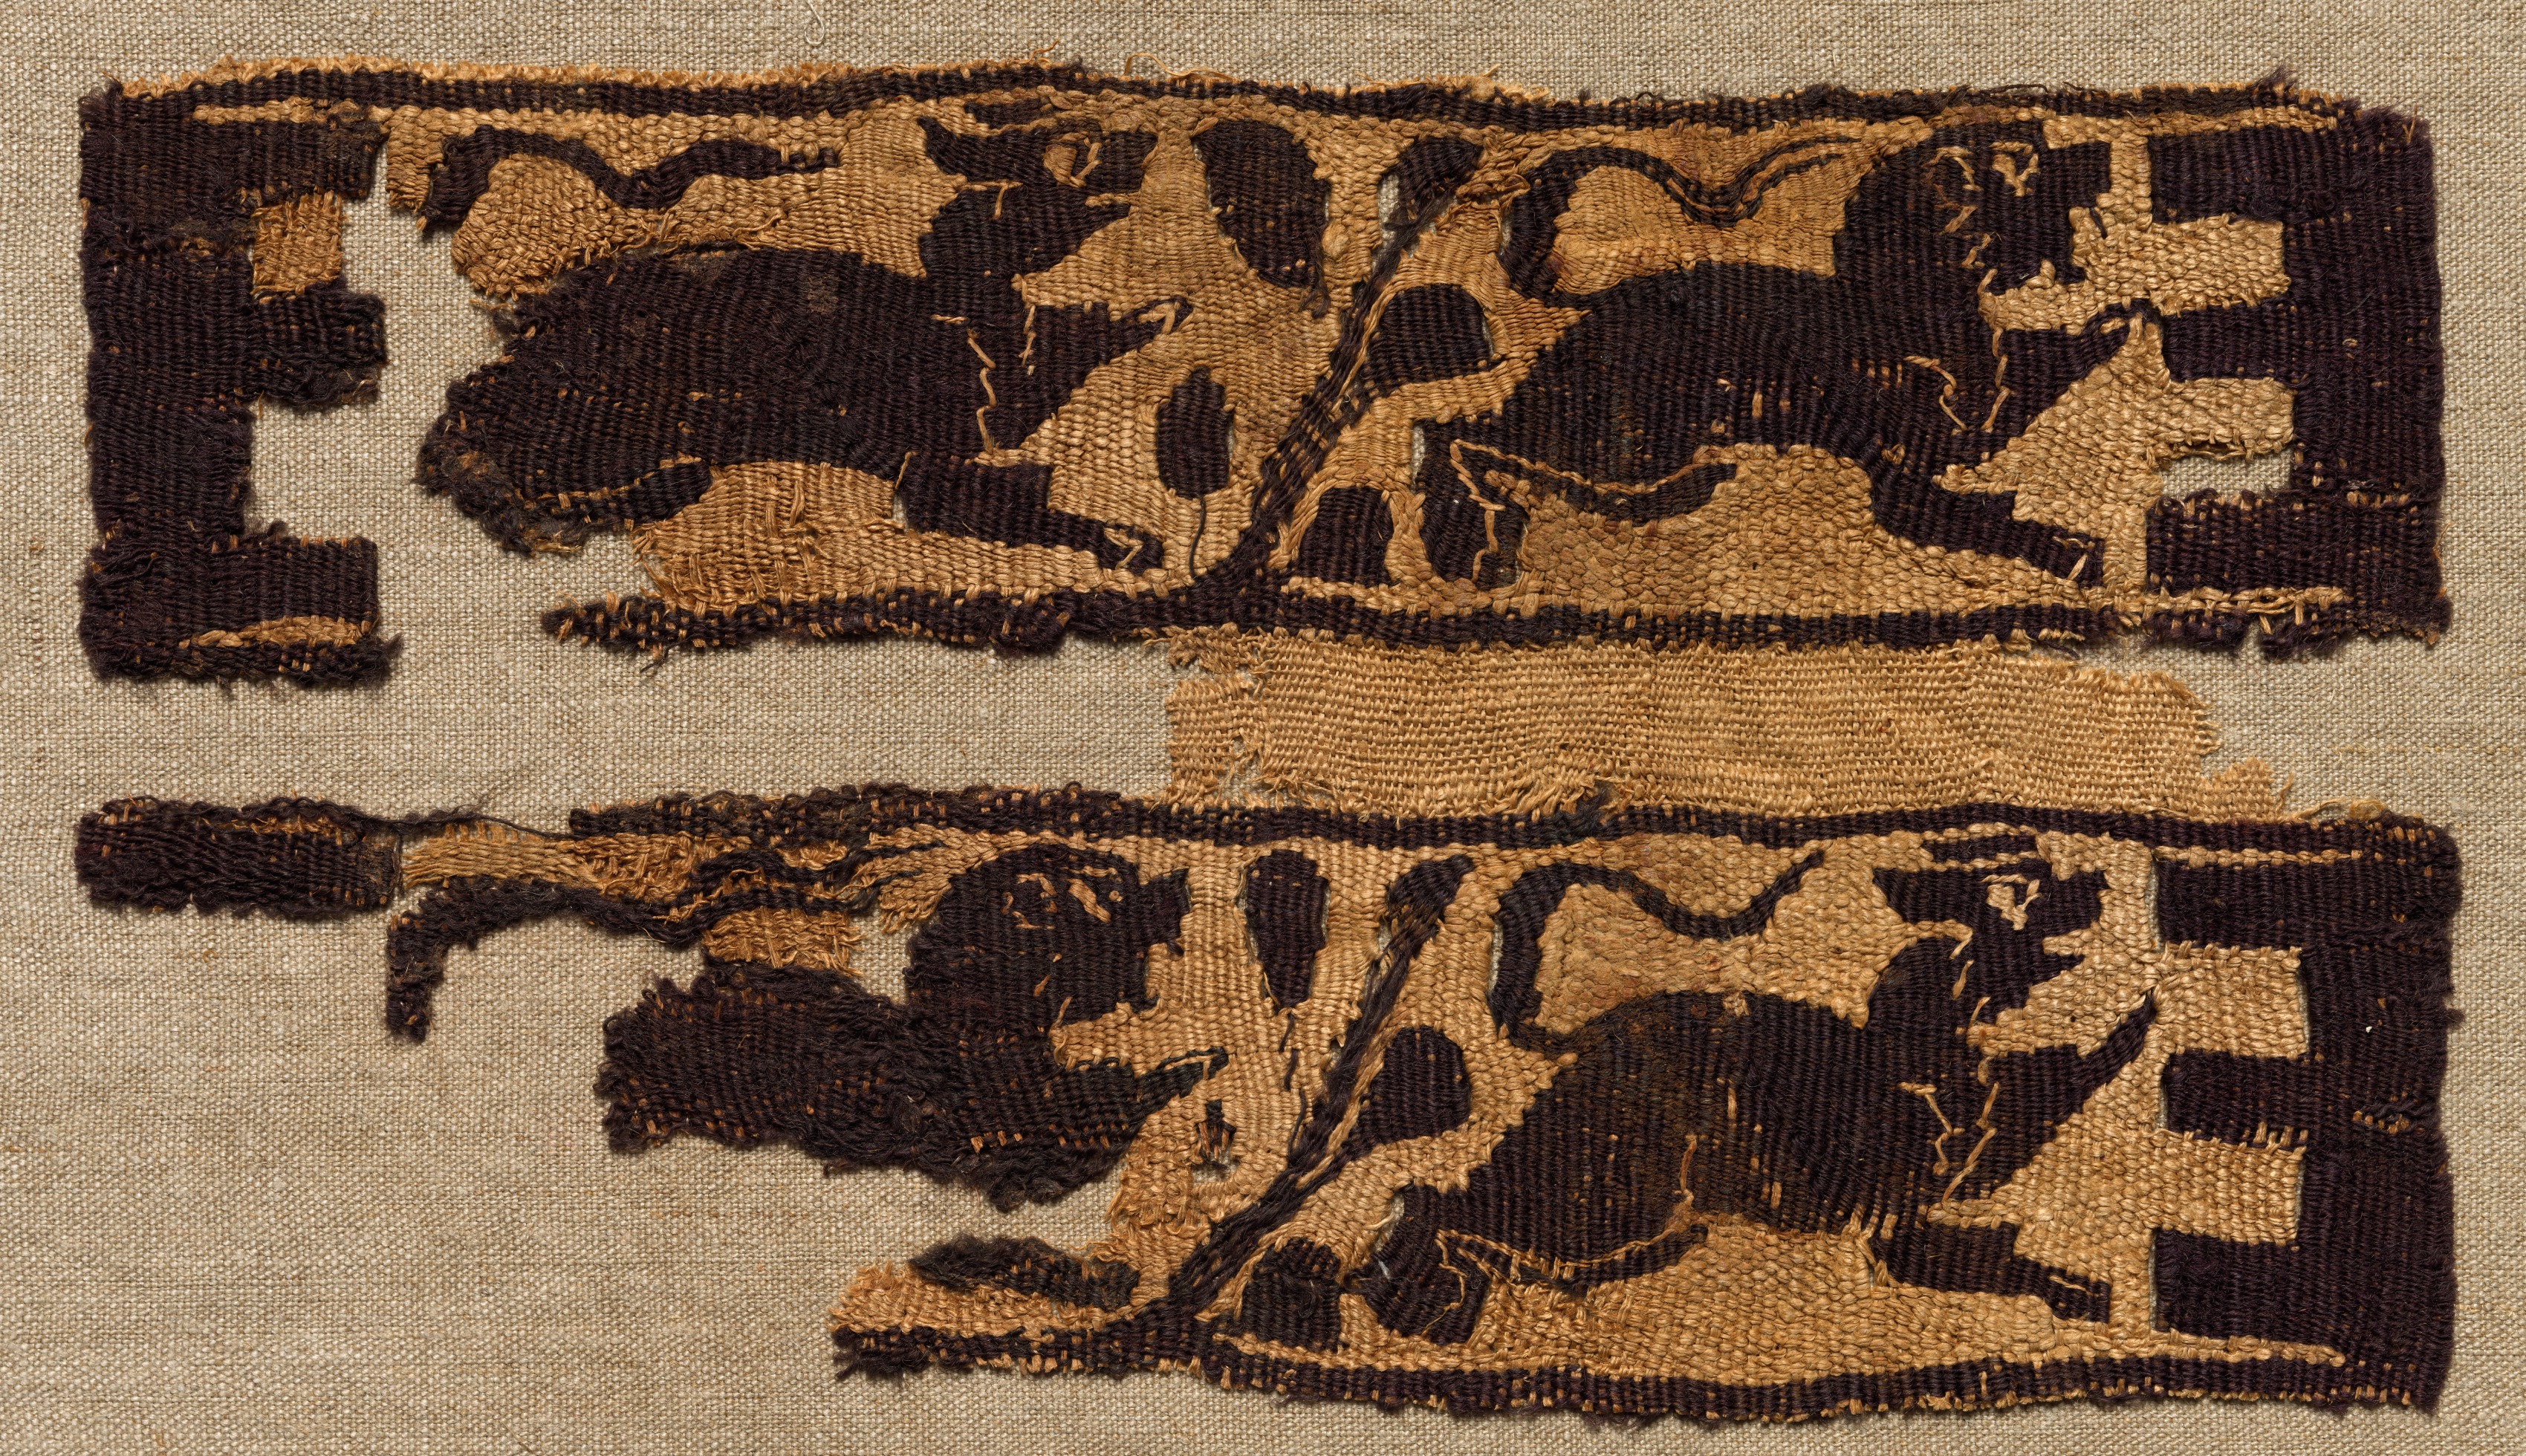 Fragment, Sleeve Ornament from a Tunic